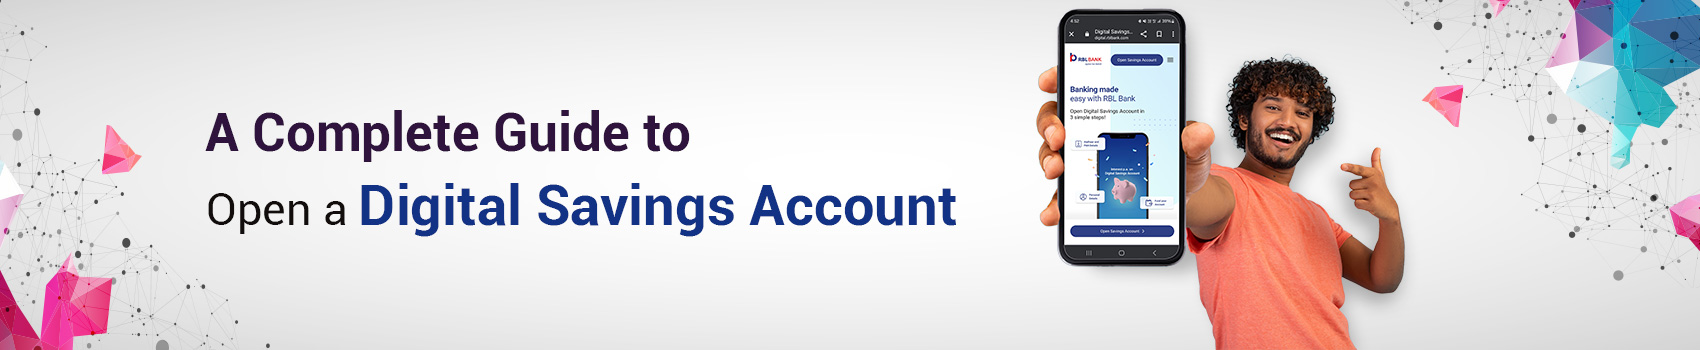 How to Open a Digital Savings Account?